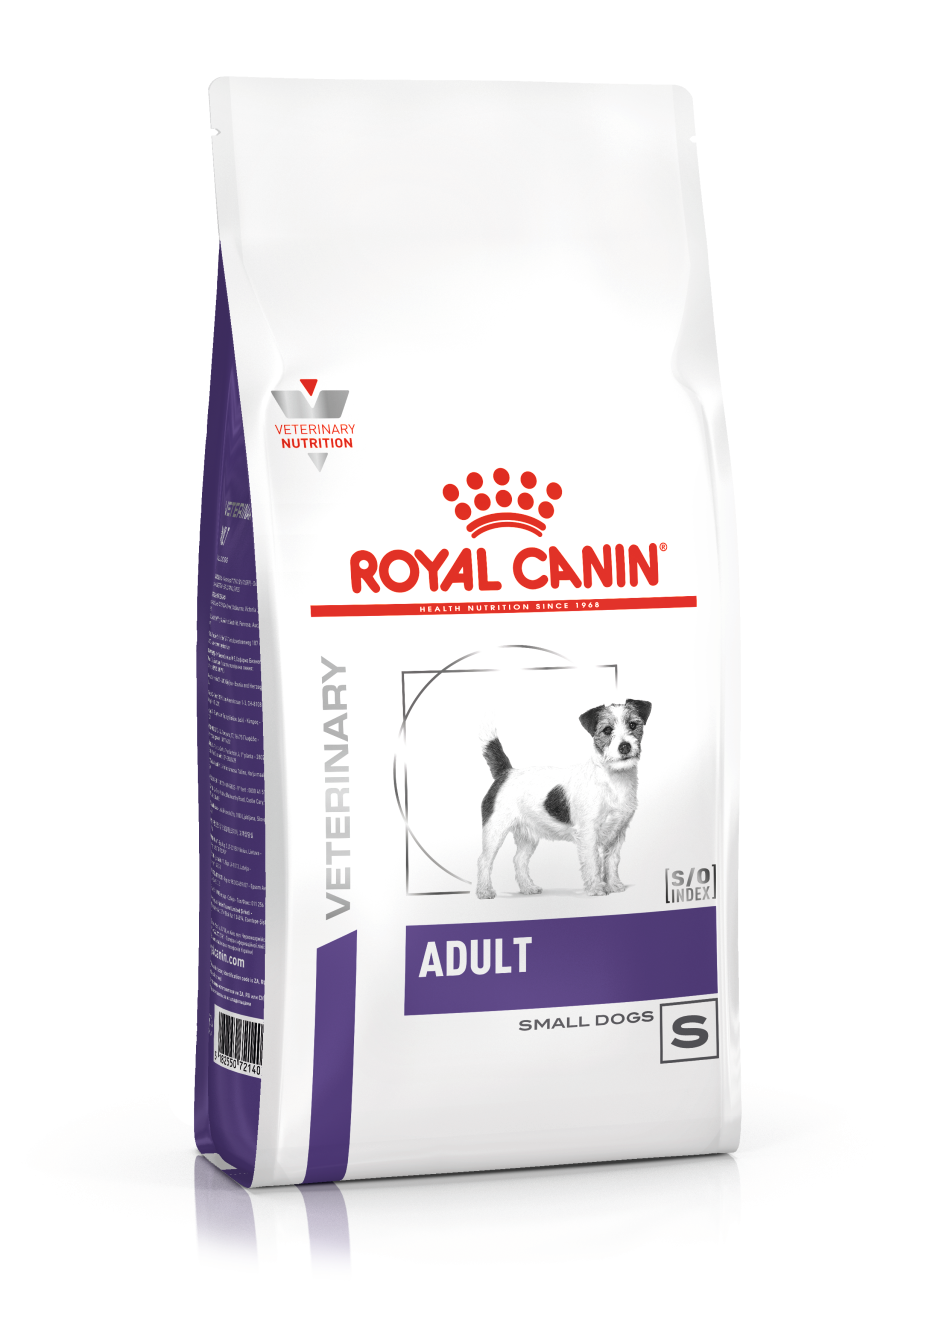 Royal canin Adult Small Dog 3x 4 kg